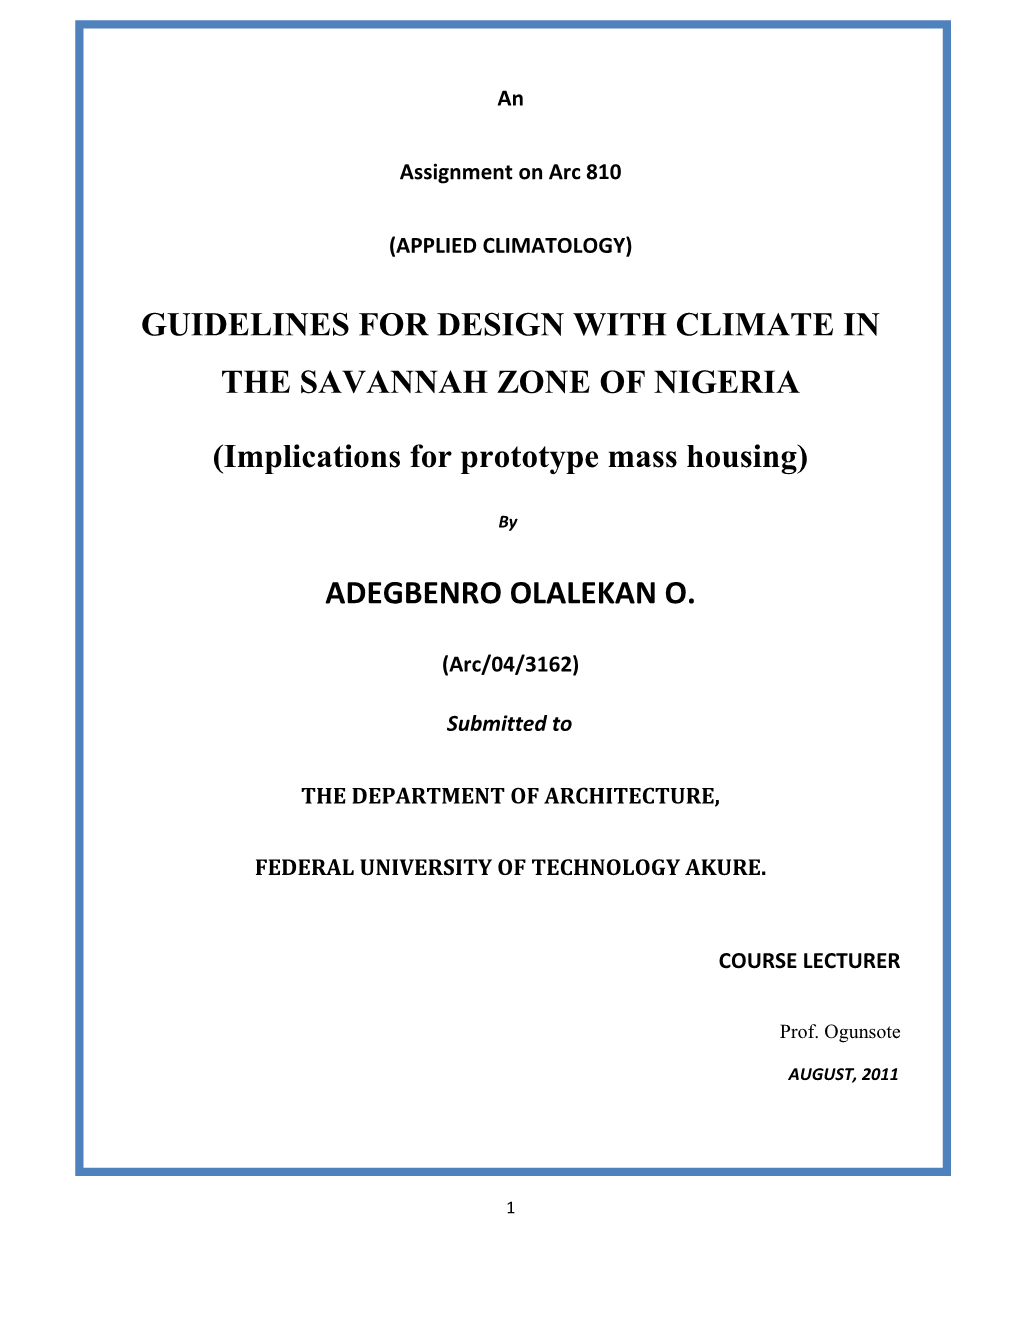 Guidelines for Design with Climate in the Savannah Zone of Nigeria